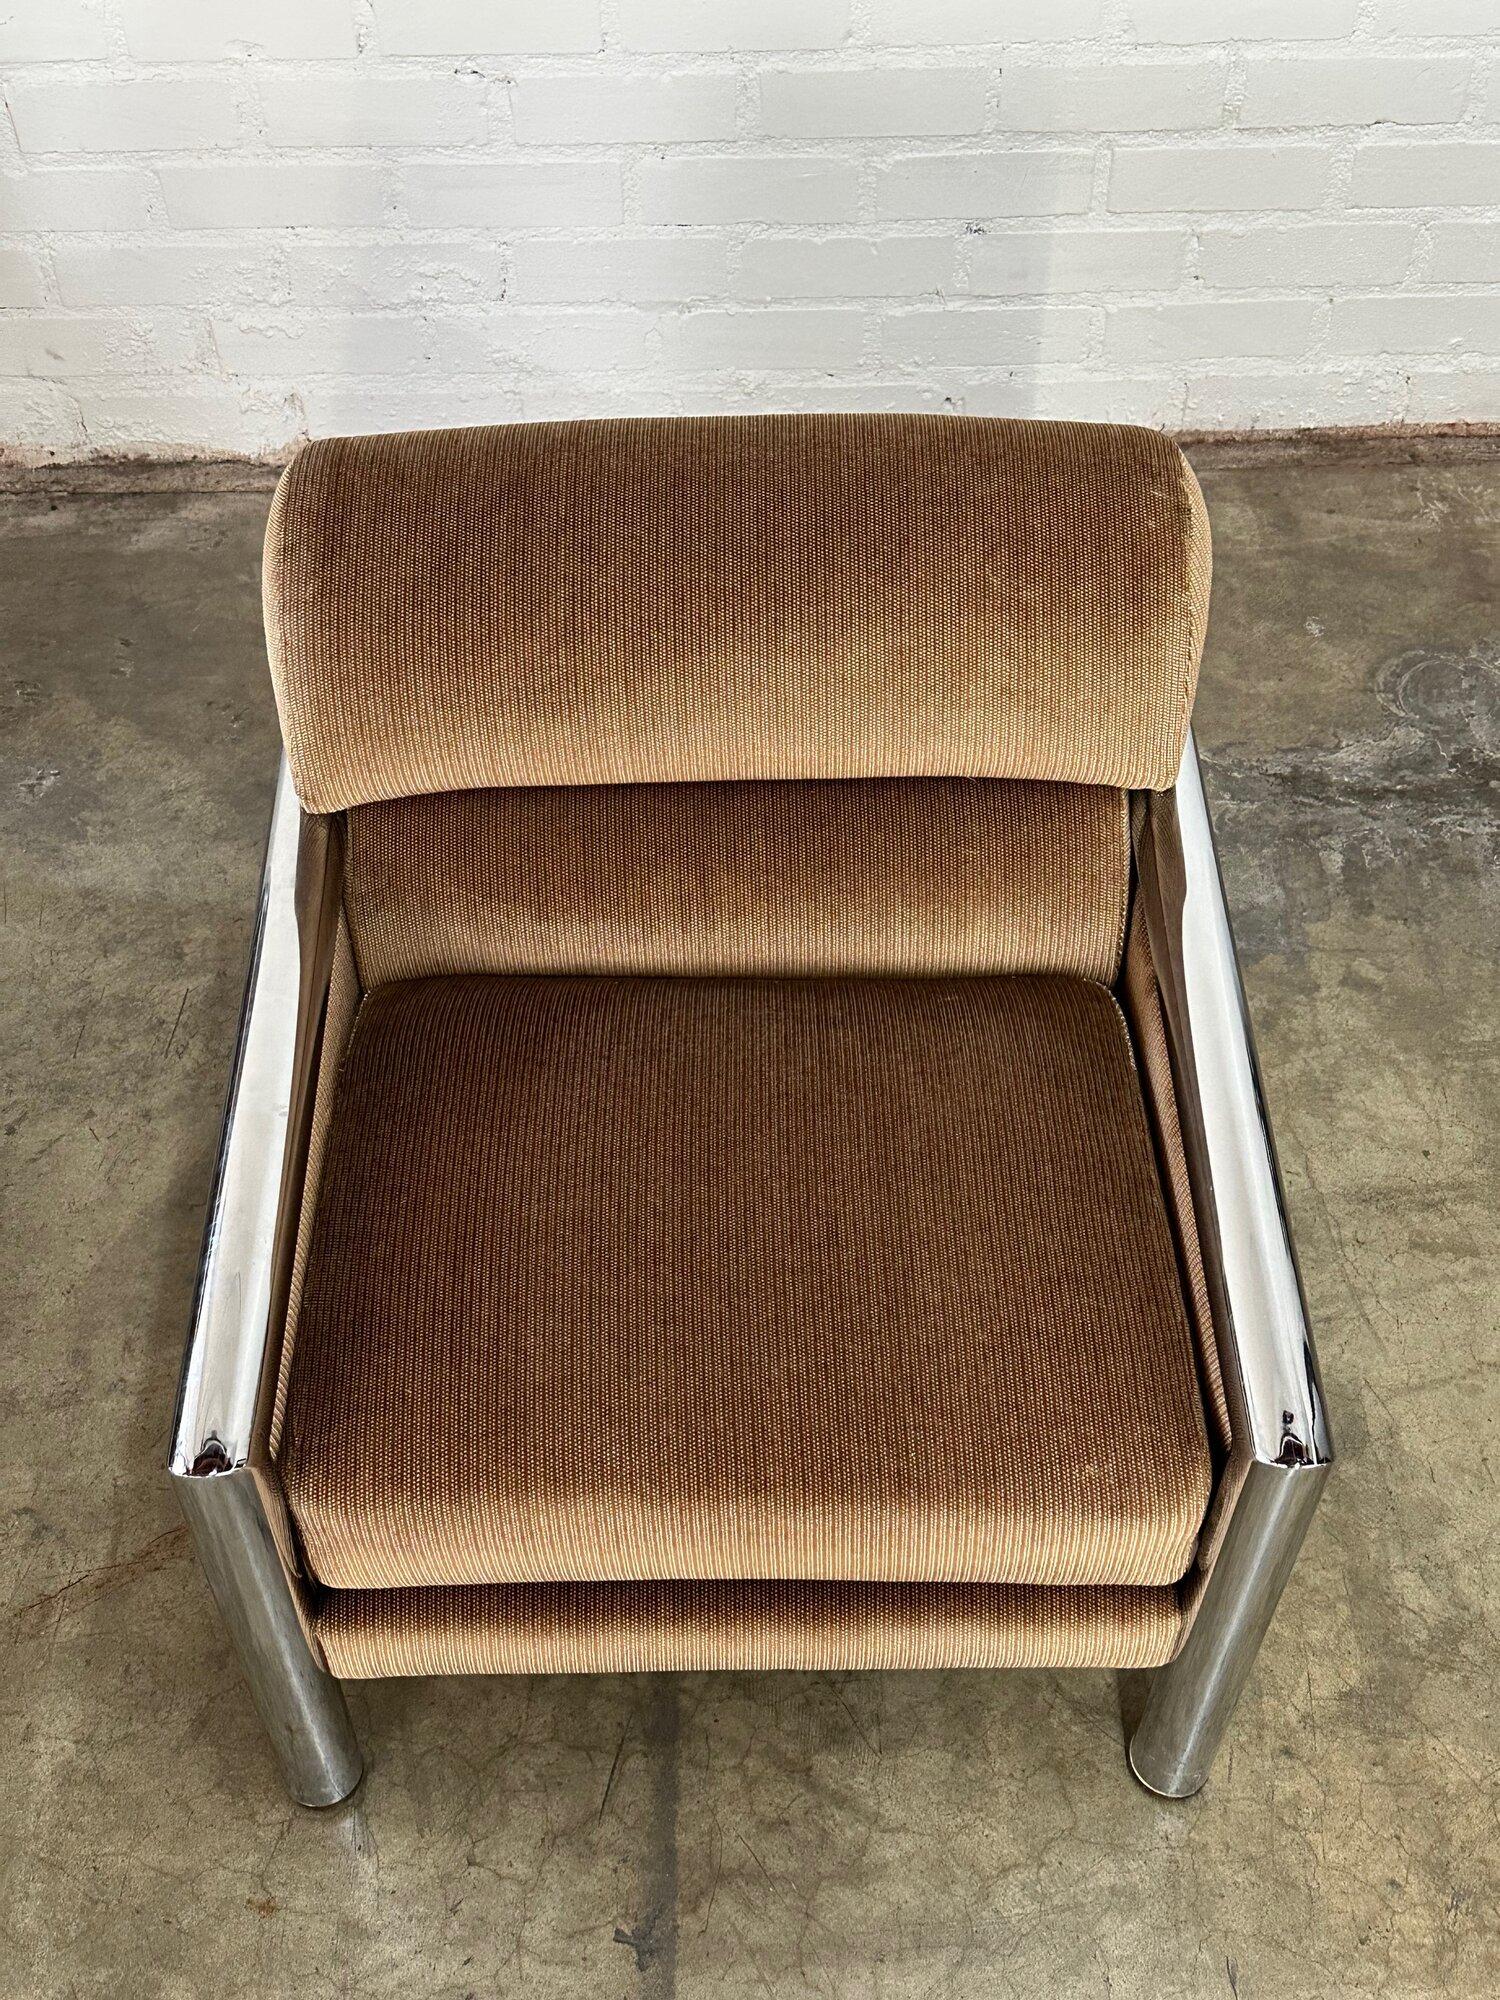 Chrome tubular lounge chair In Good Condition For Sale In Los Angeles, CA